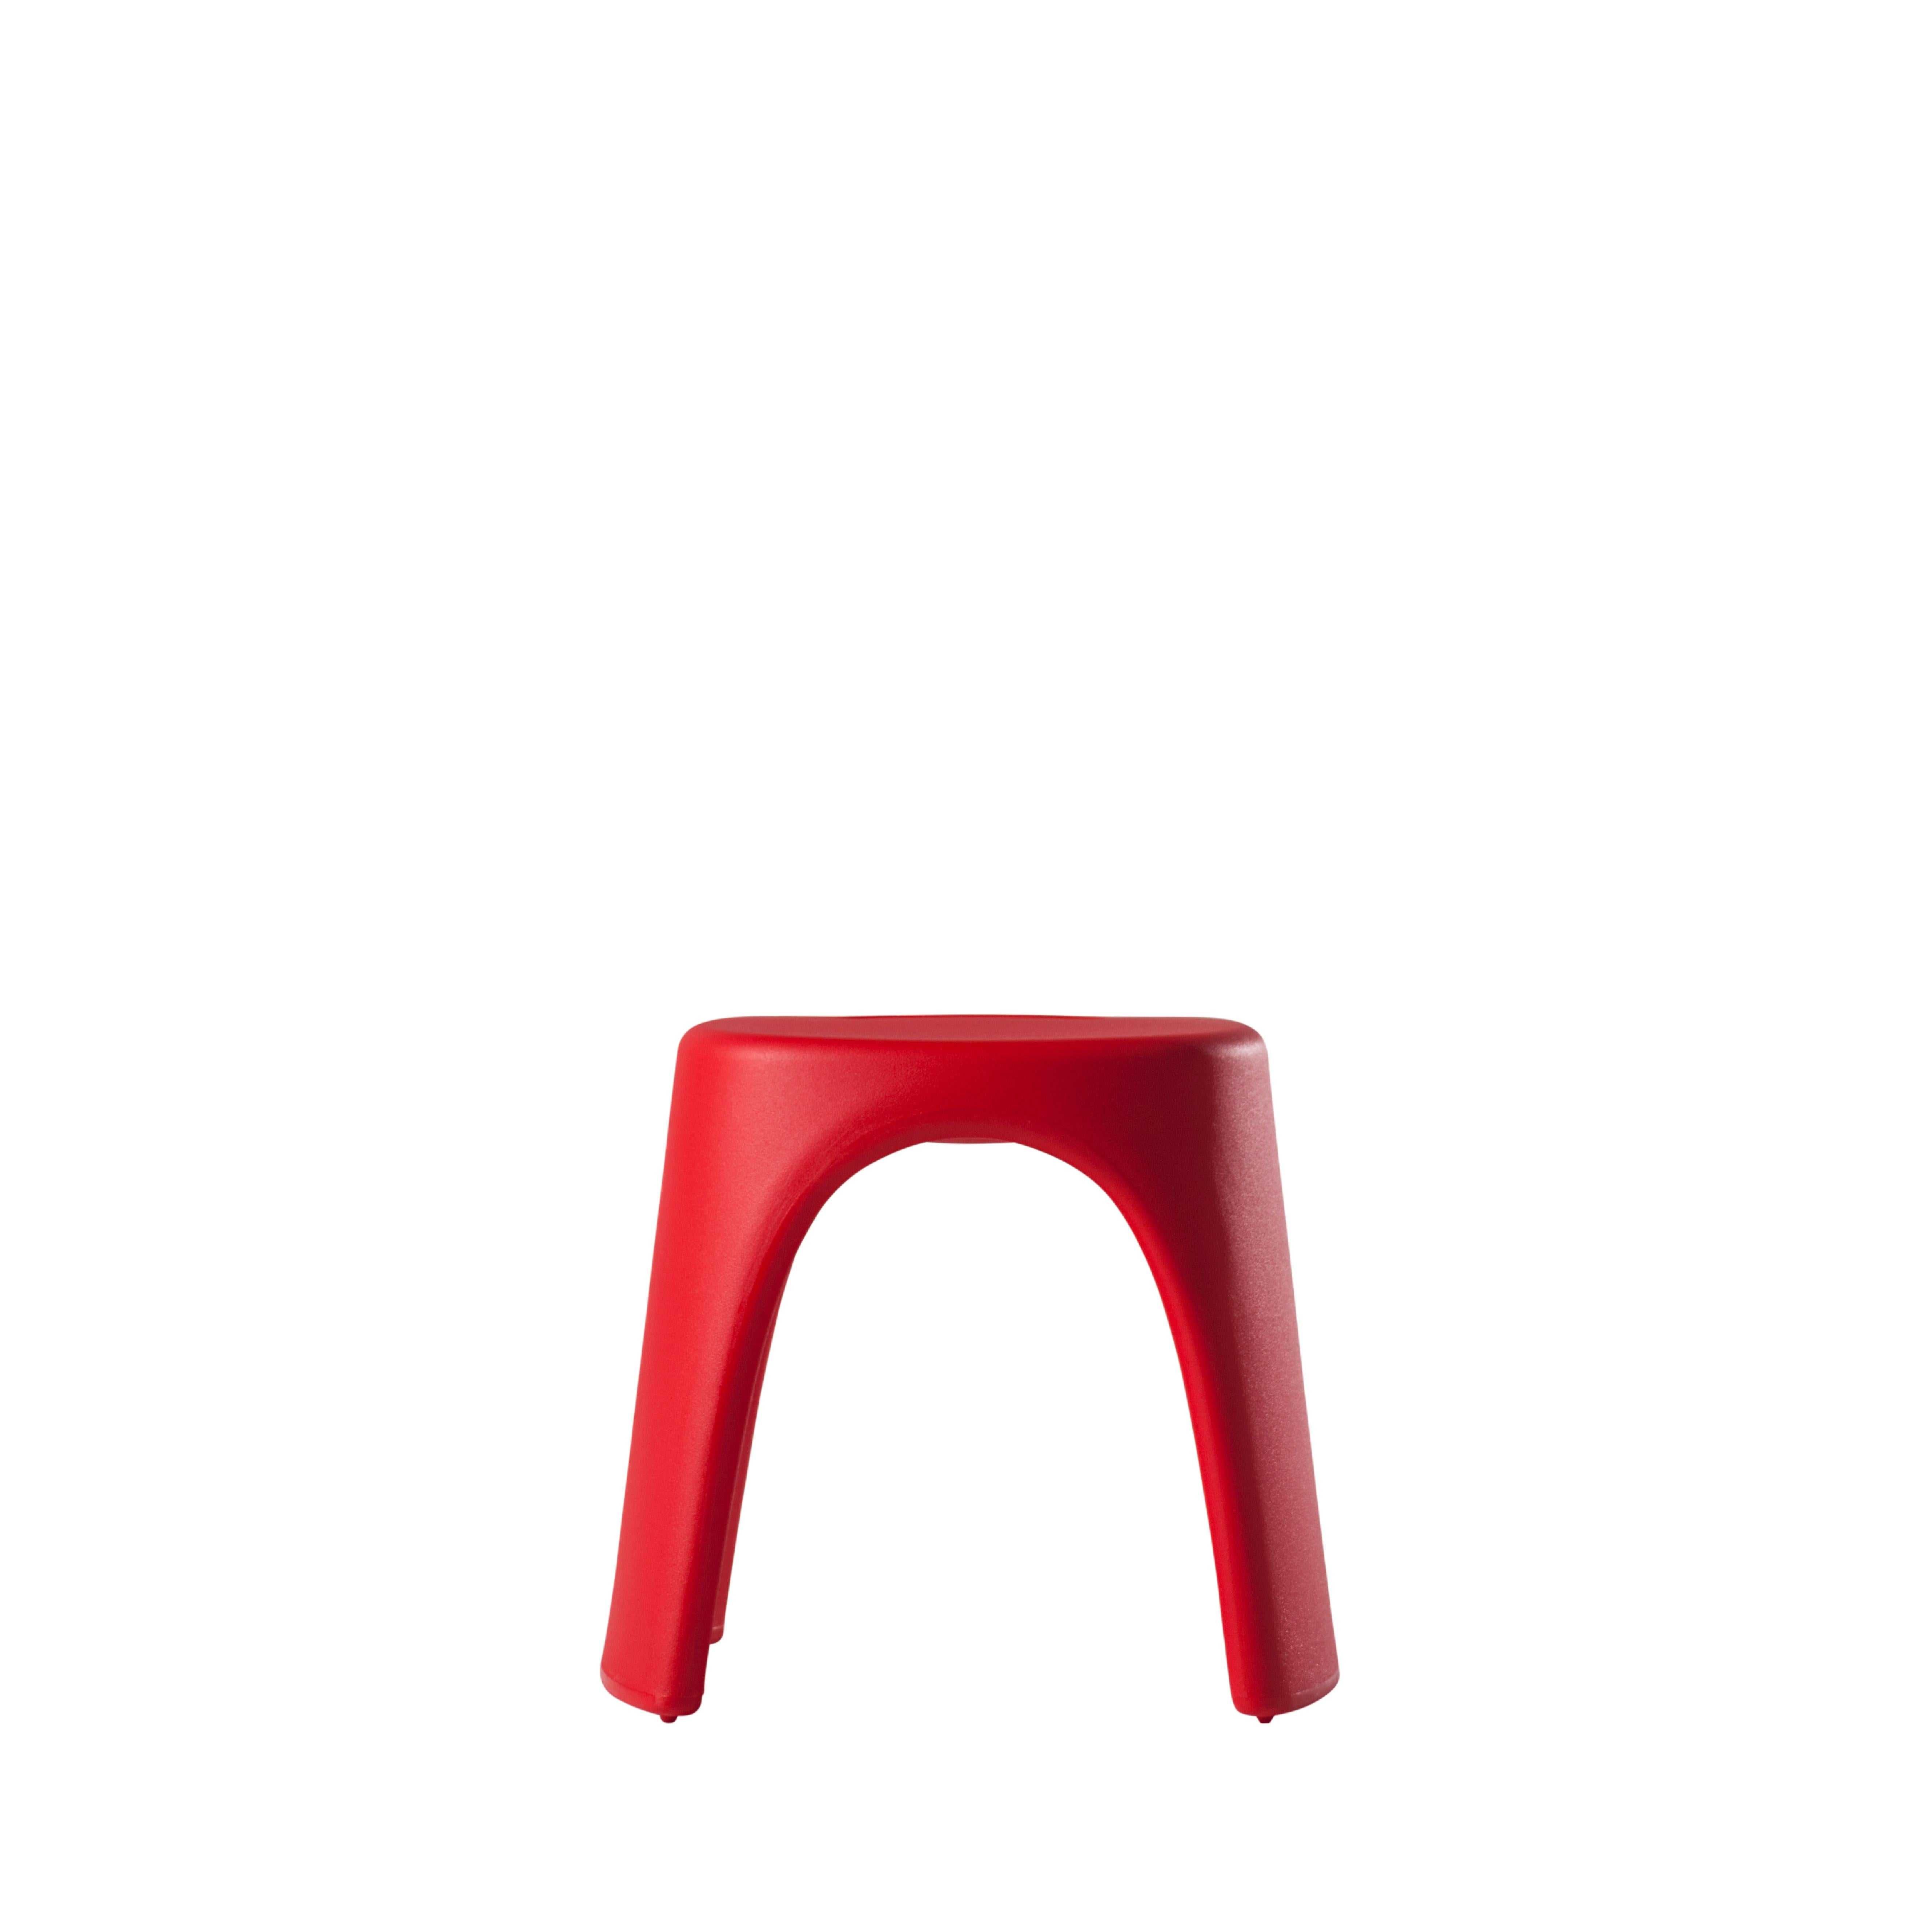 Flame Red Amélie Sgabello Stool by Italo Pertichini
Dimensions: D 40 x W 46 x H 43 cm.
Materials: Polyethylene.
Weight: 4 kg.

Available in a standard version and lacquered version. Prices may vary. Available in different color options. This product